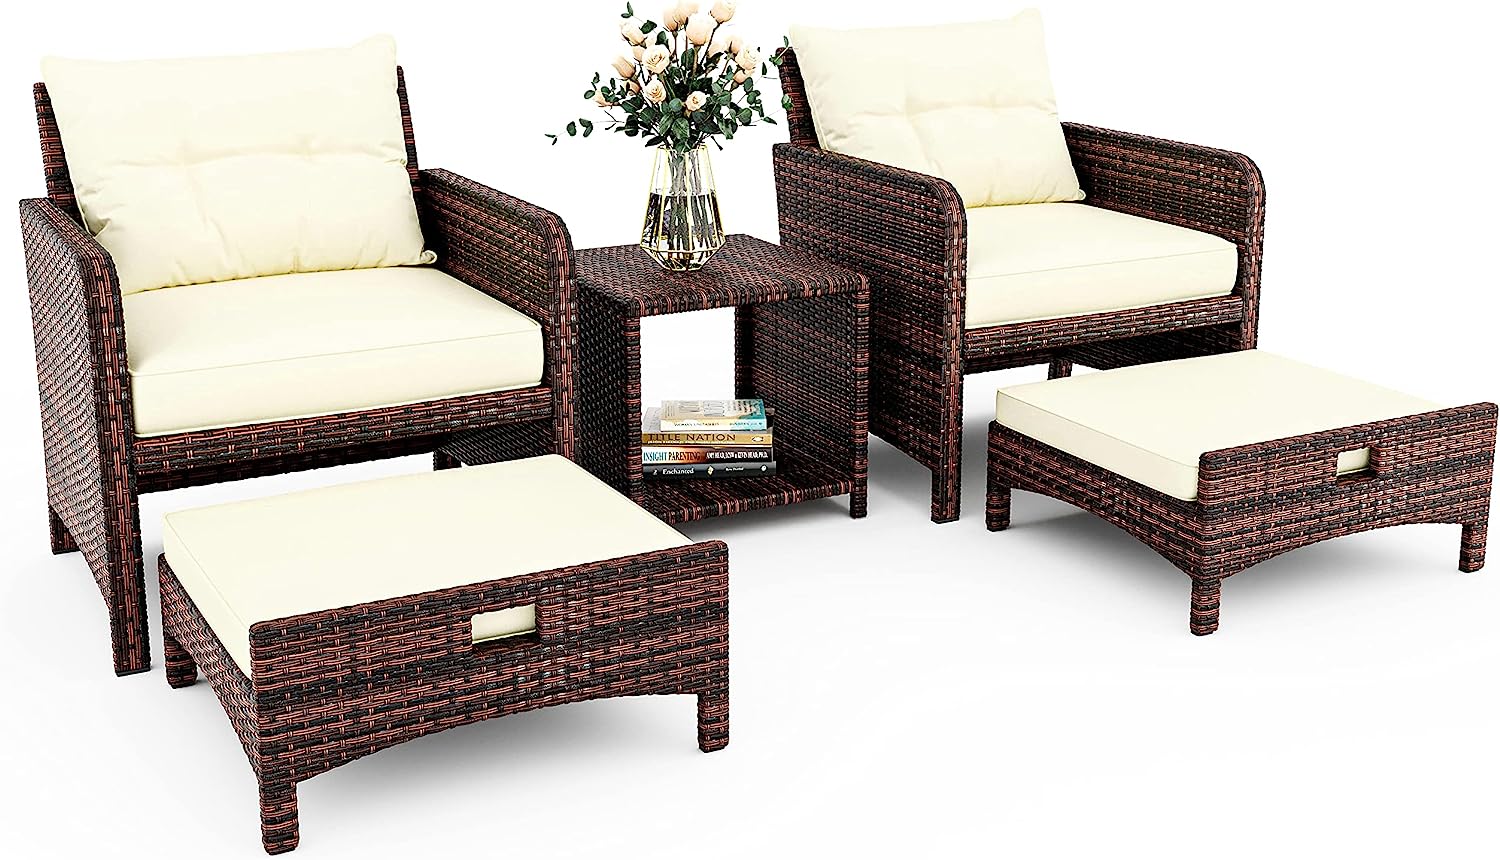 5 Piece Wicker Furniture Set for Outdoors by Pamapic Store